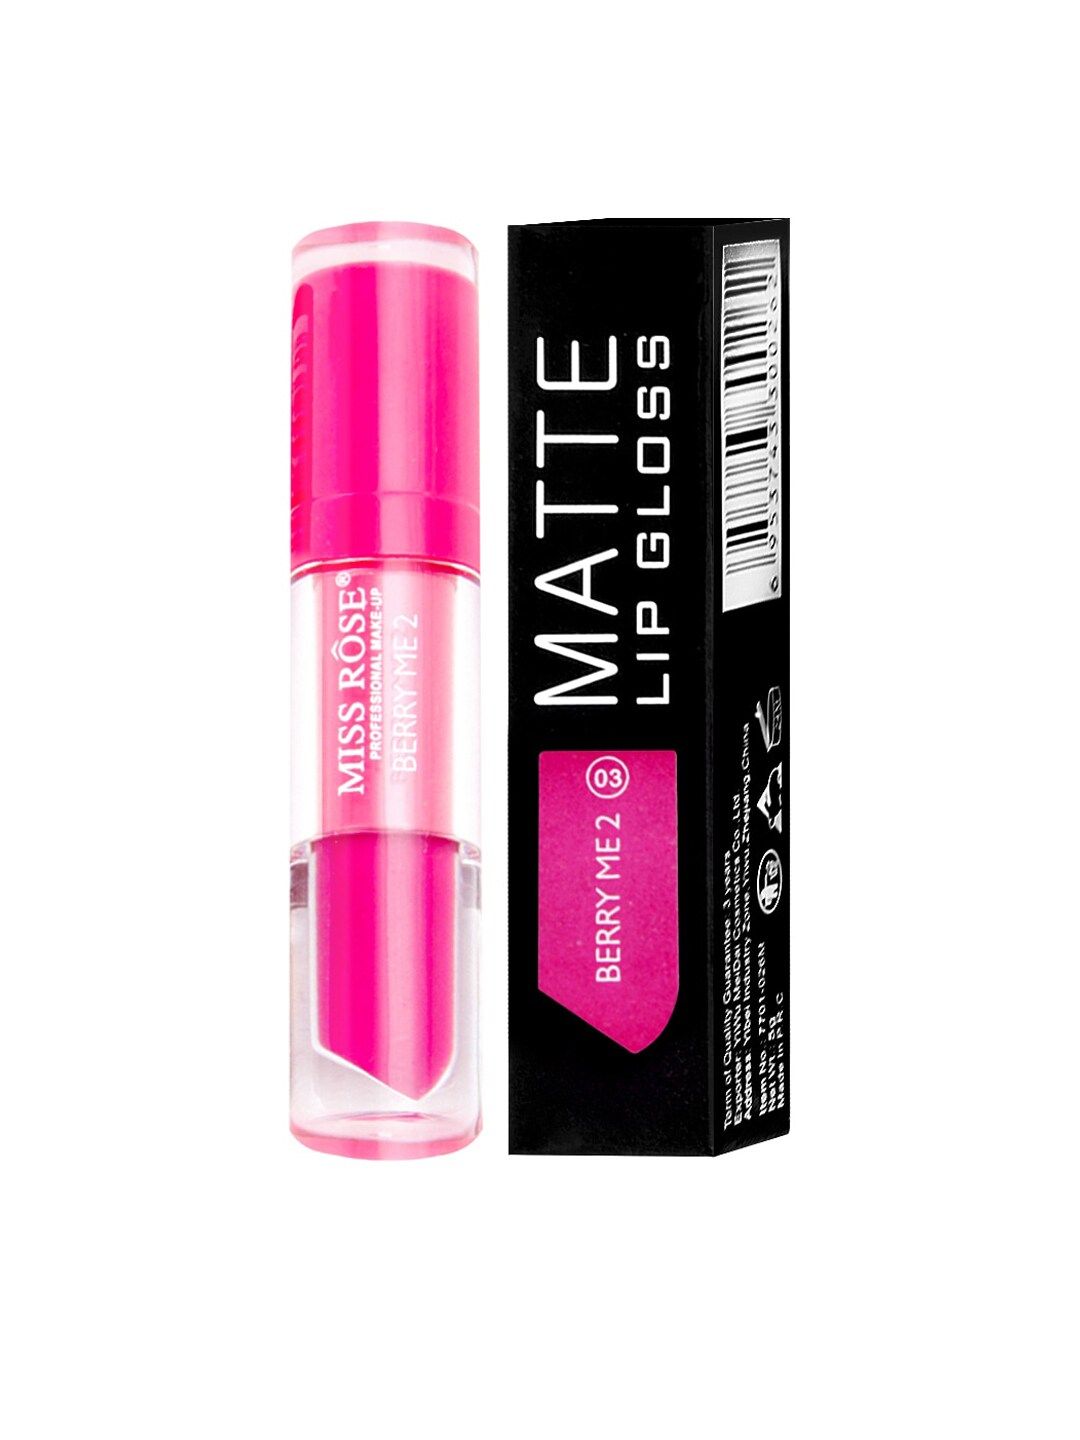 MISS ROSE Matte LipGloss Berry Me2 7701-026M 03 20 gm Price in India